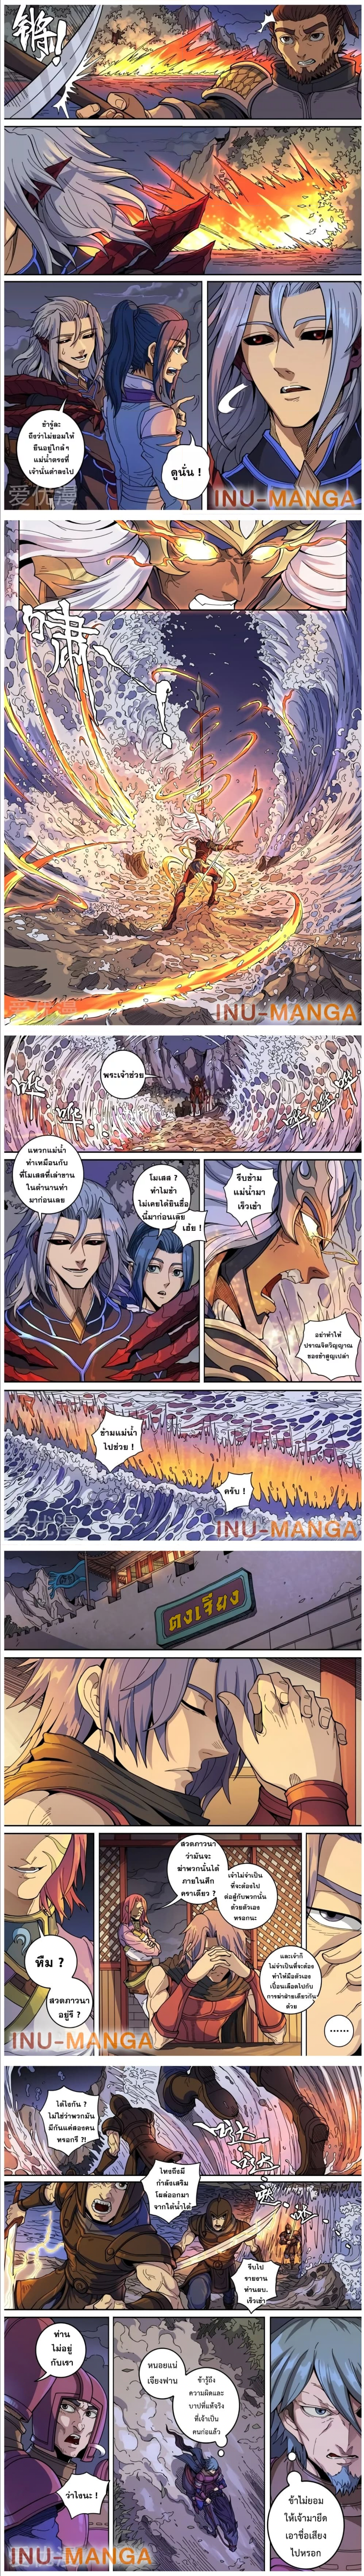 Tangyan in The Other World 134 (3)